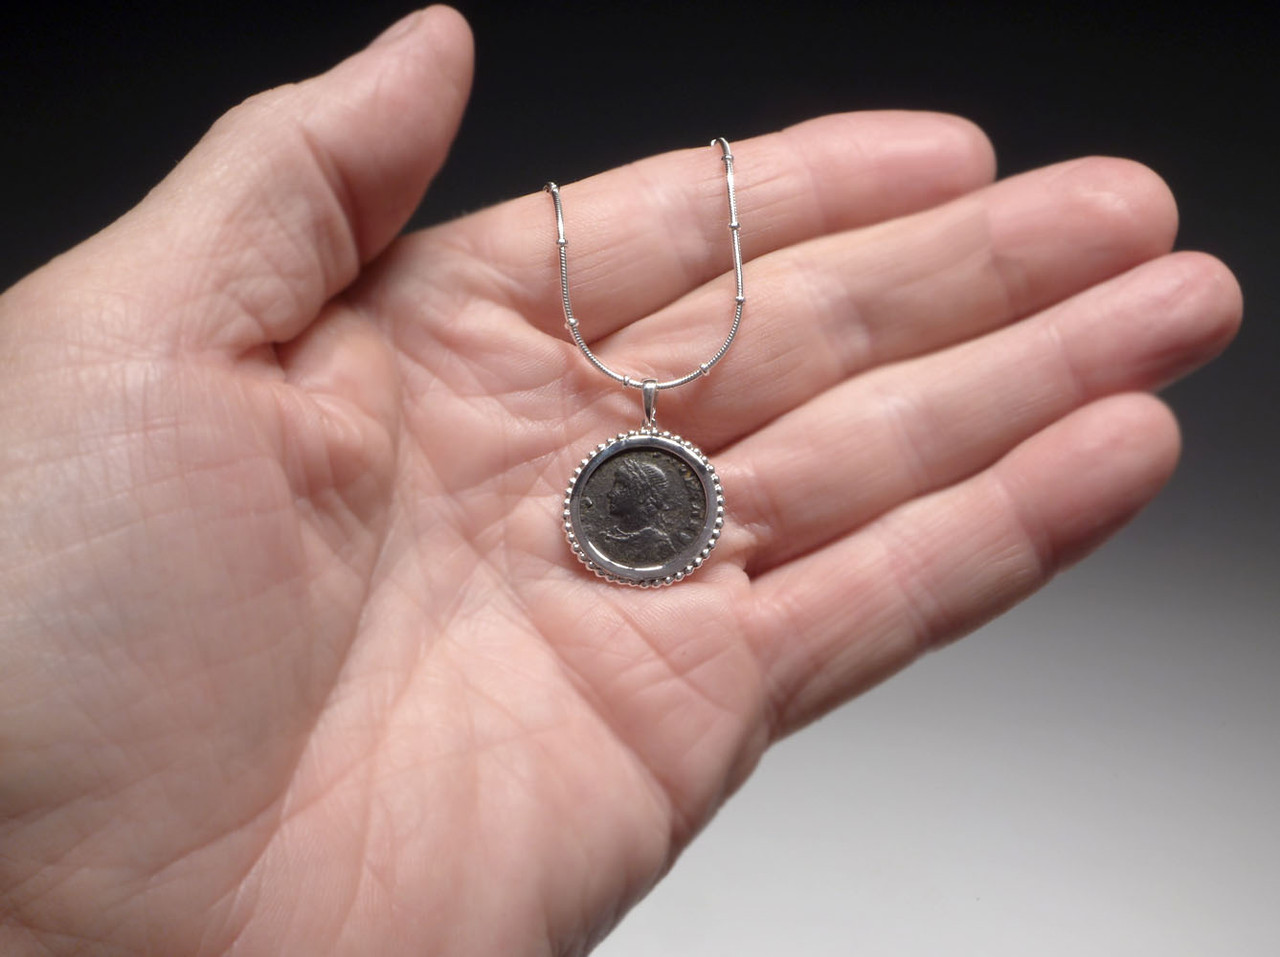 Israel 2 Old, Collector's Coins Layered Pendant Necklace – noatam